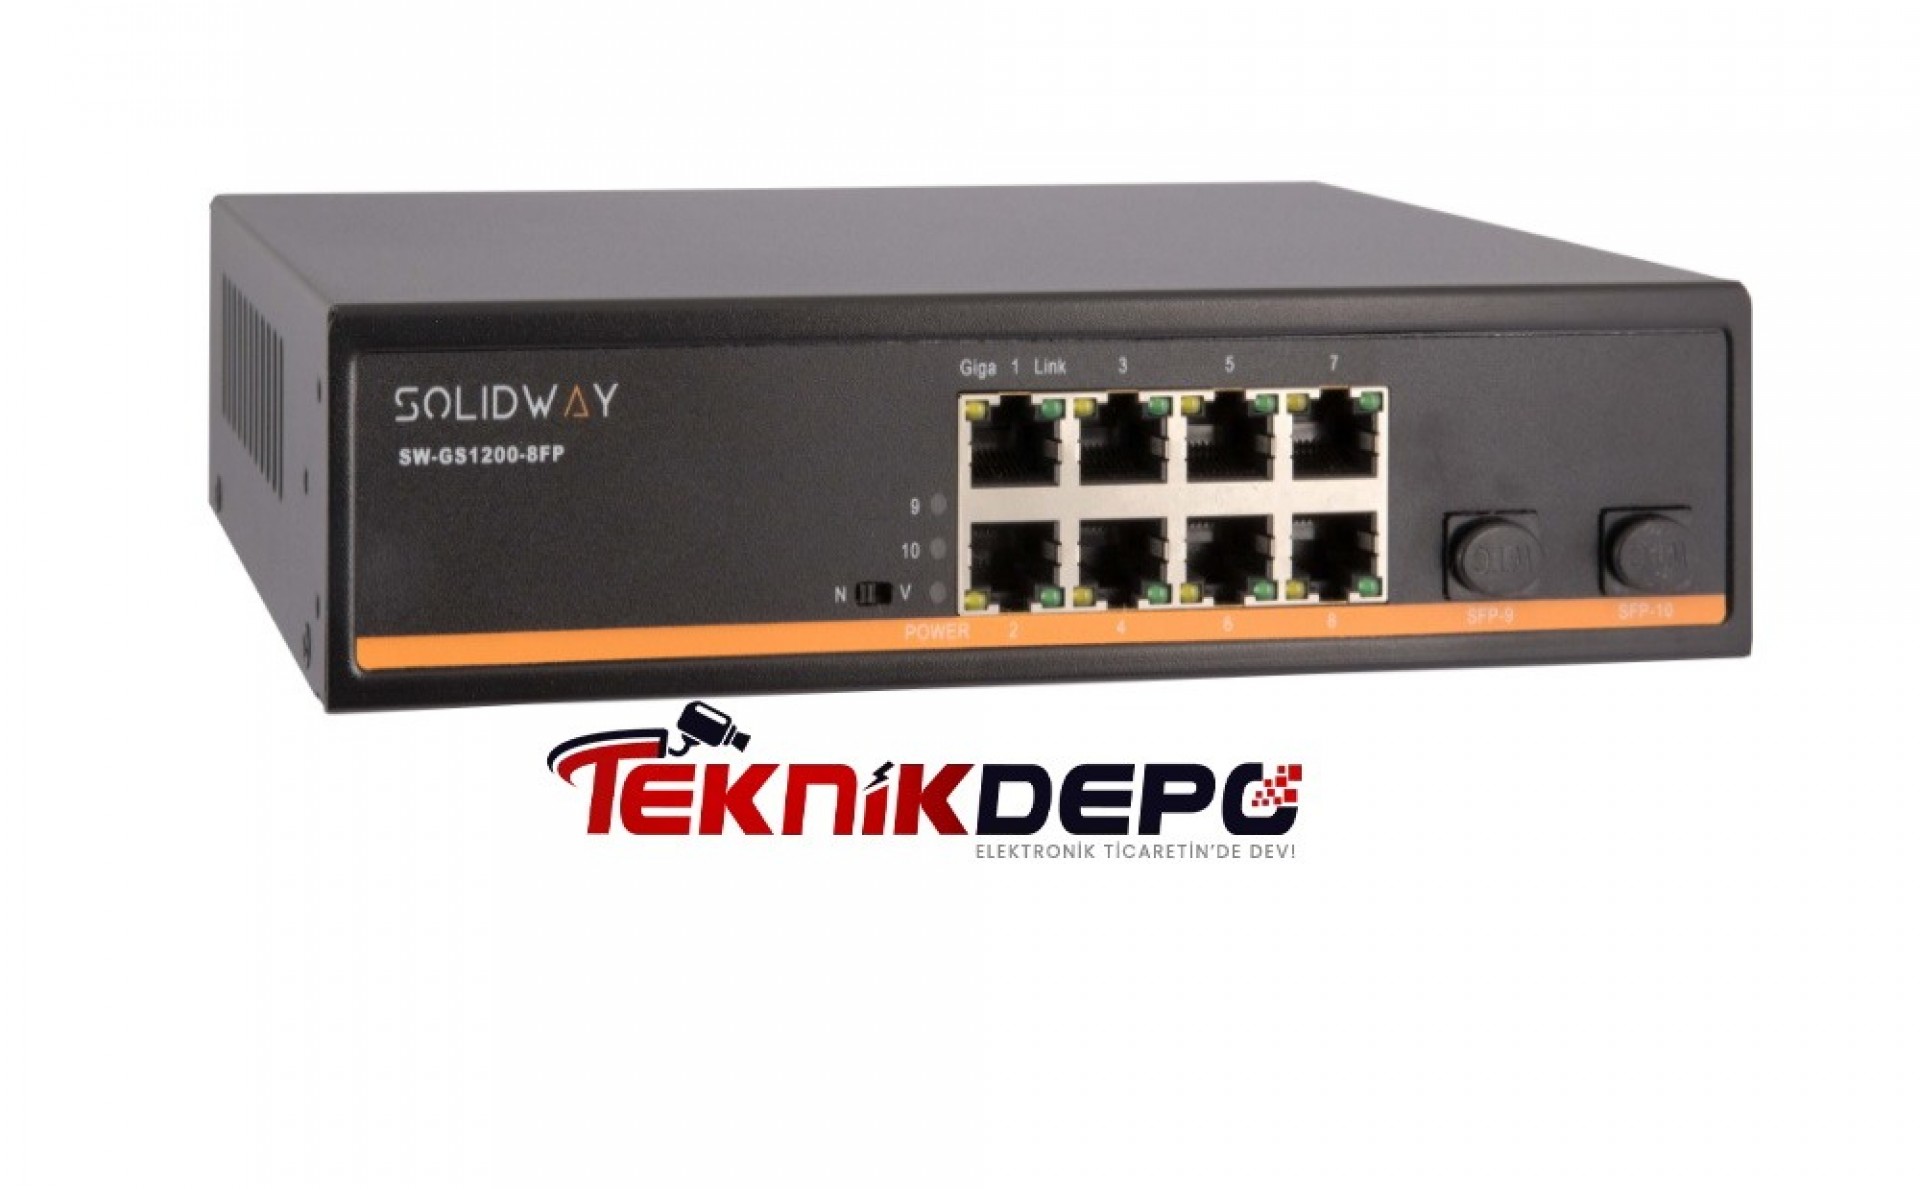 Solidway SW-GS1200-8FP PoE Switchler